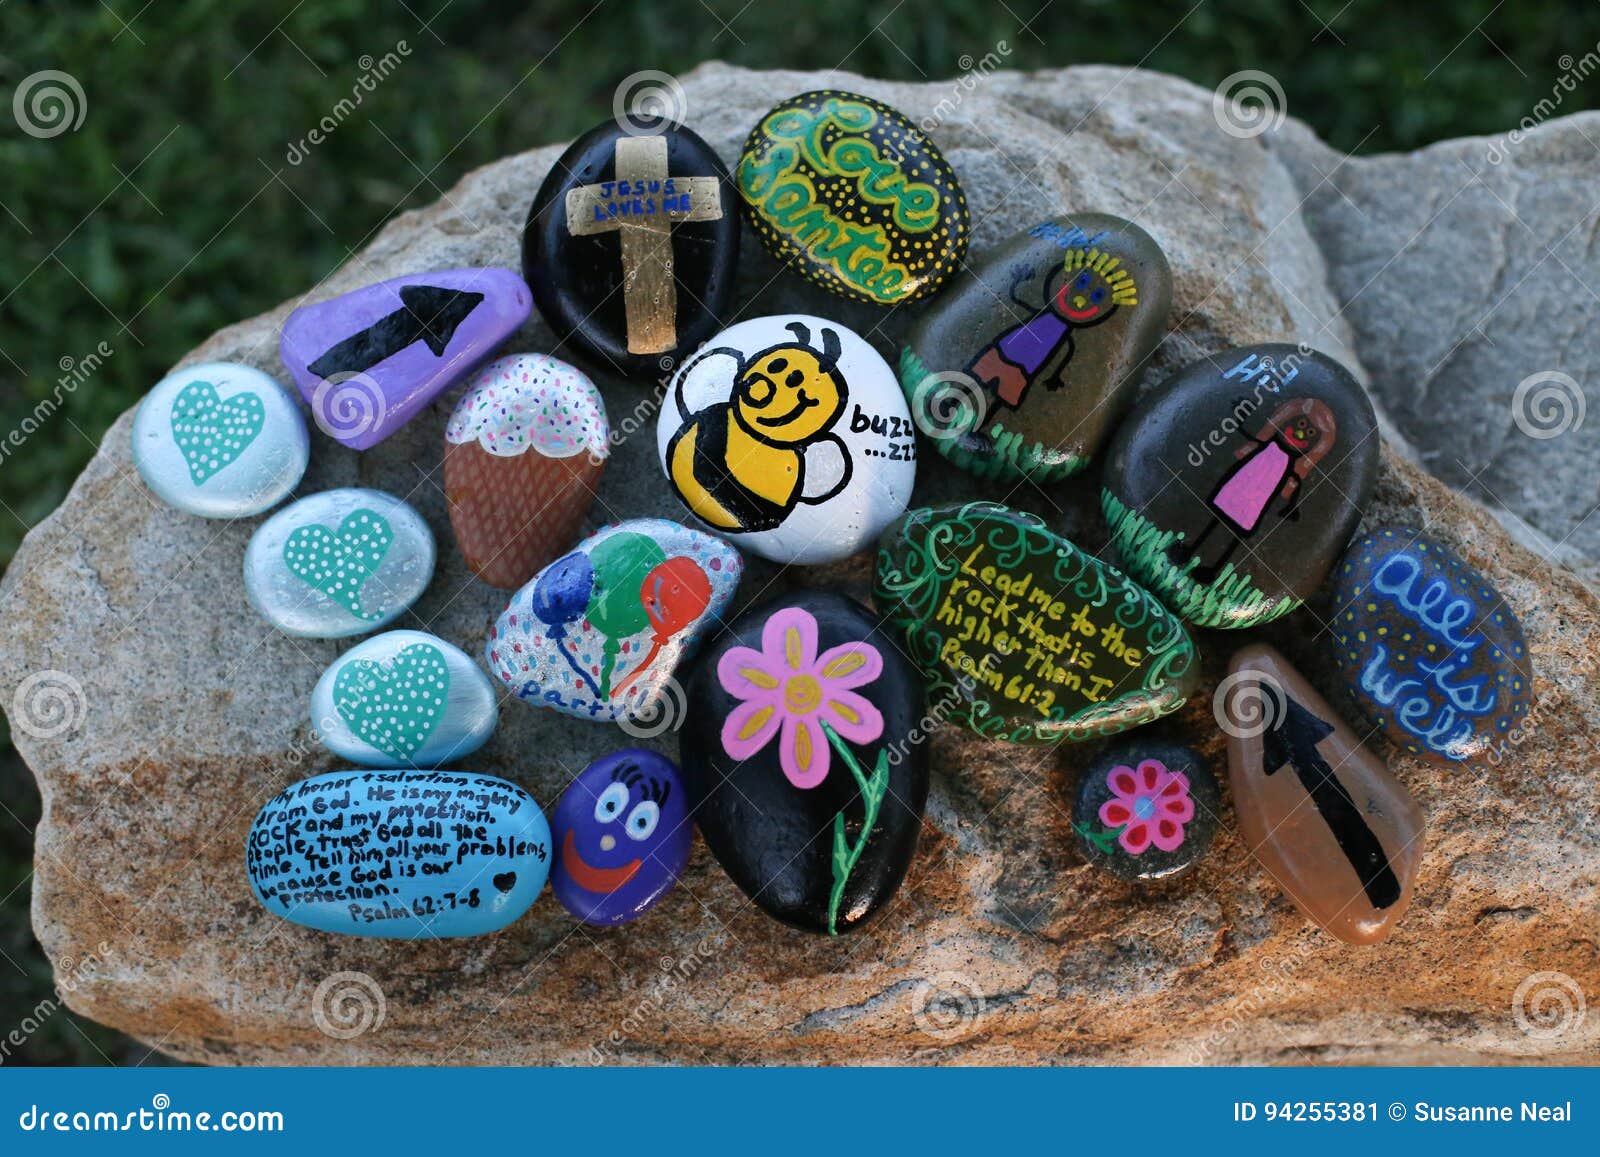 many decorated painted rocks displayed on a small boulder